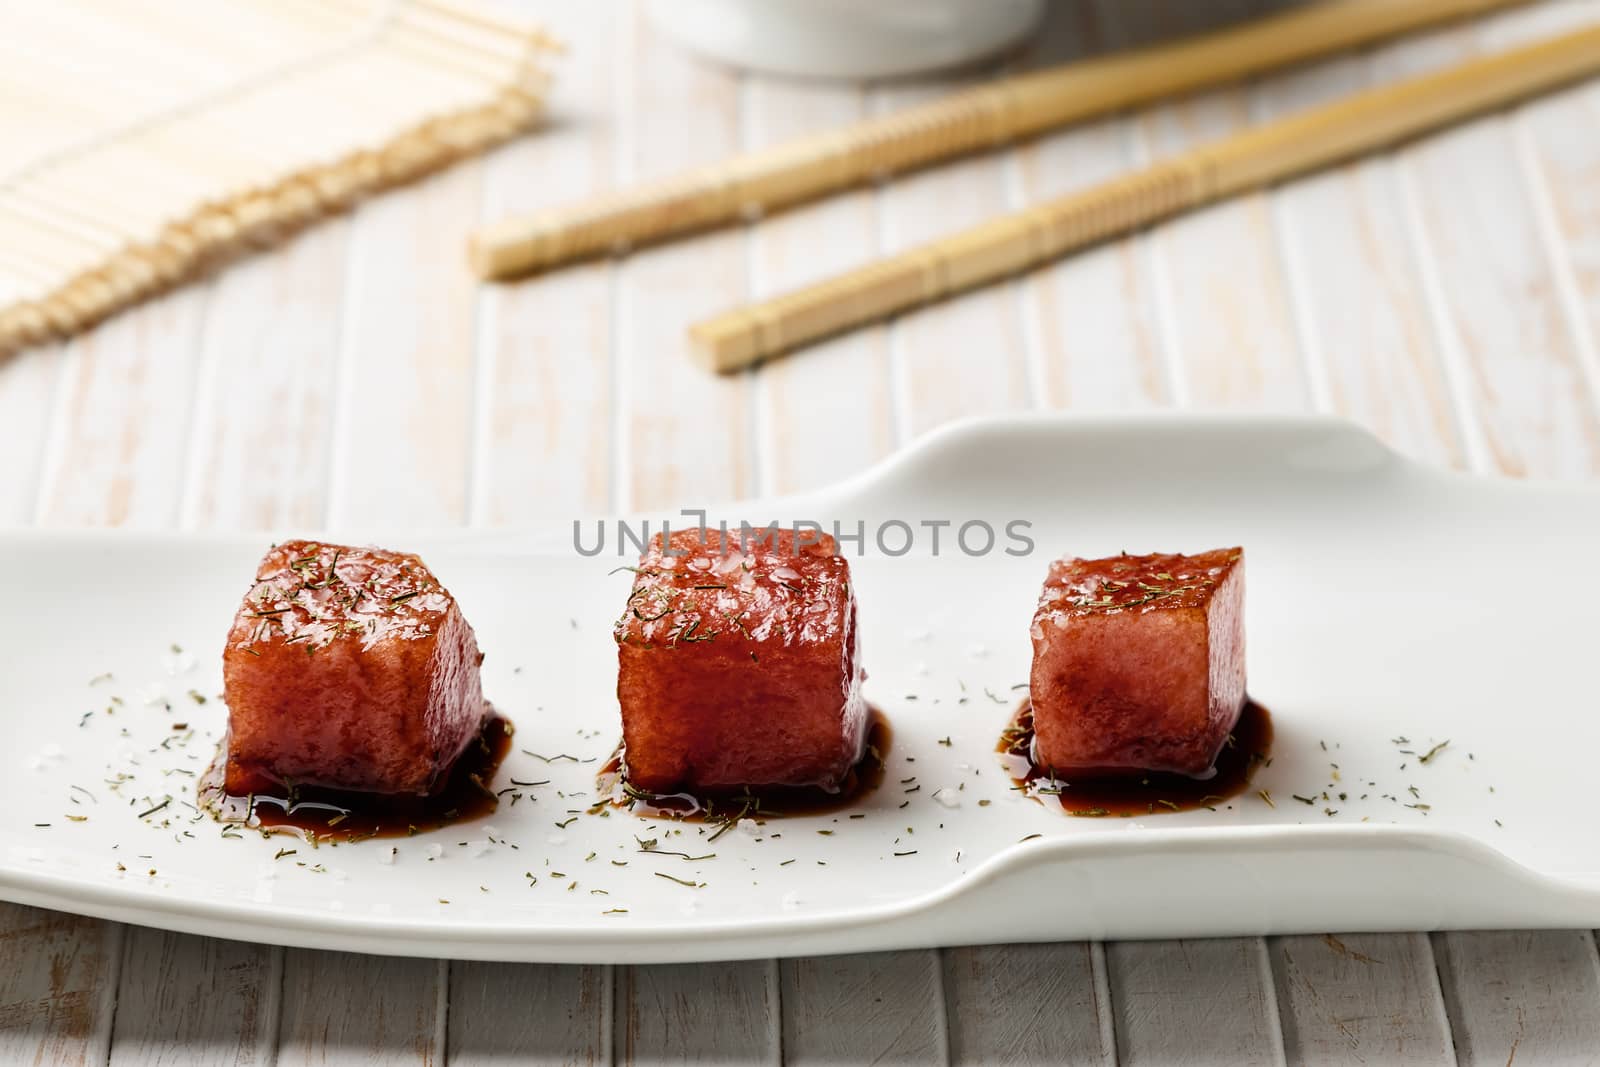 Tuna sashimi dipped in soy sauce,  thick salt and dill with chopsticks and bamboo mat. Raw fish in traditional Japanese style. Horizontal image.